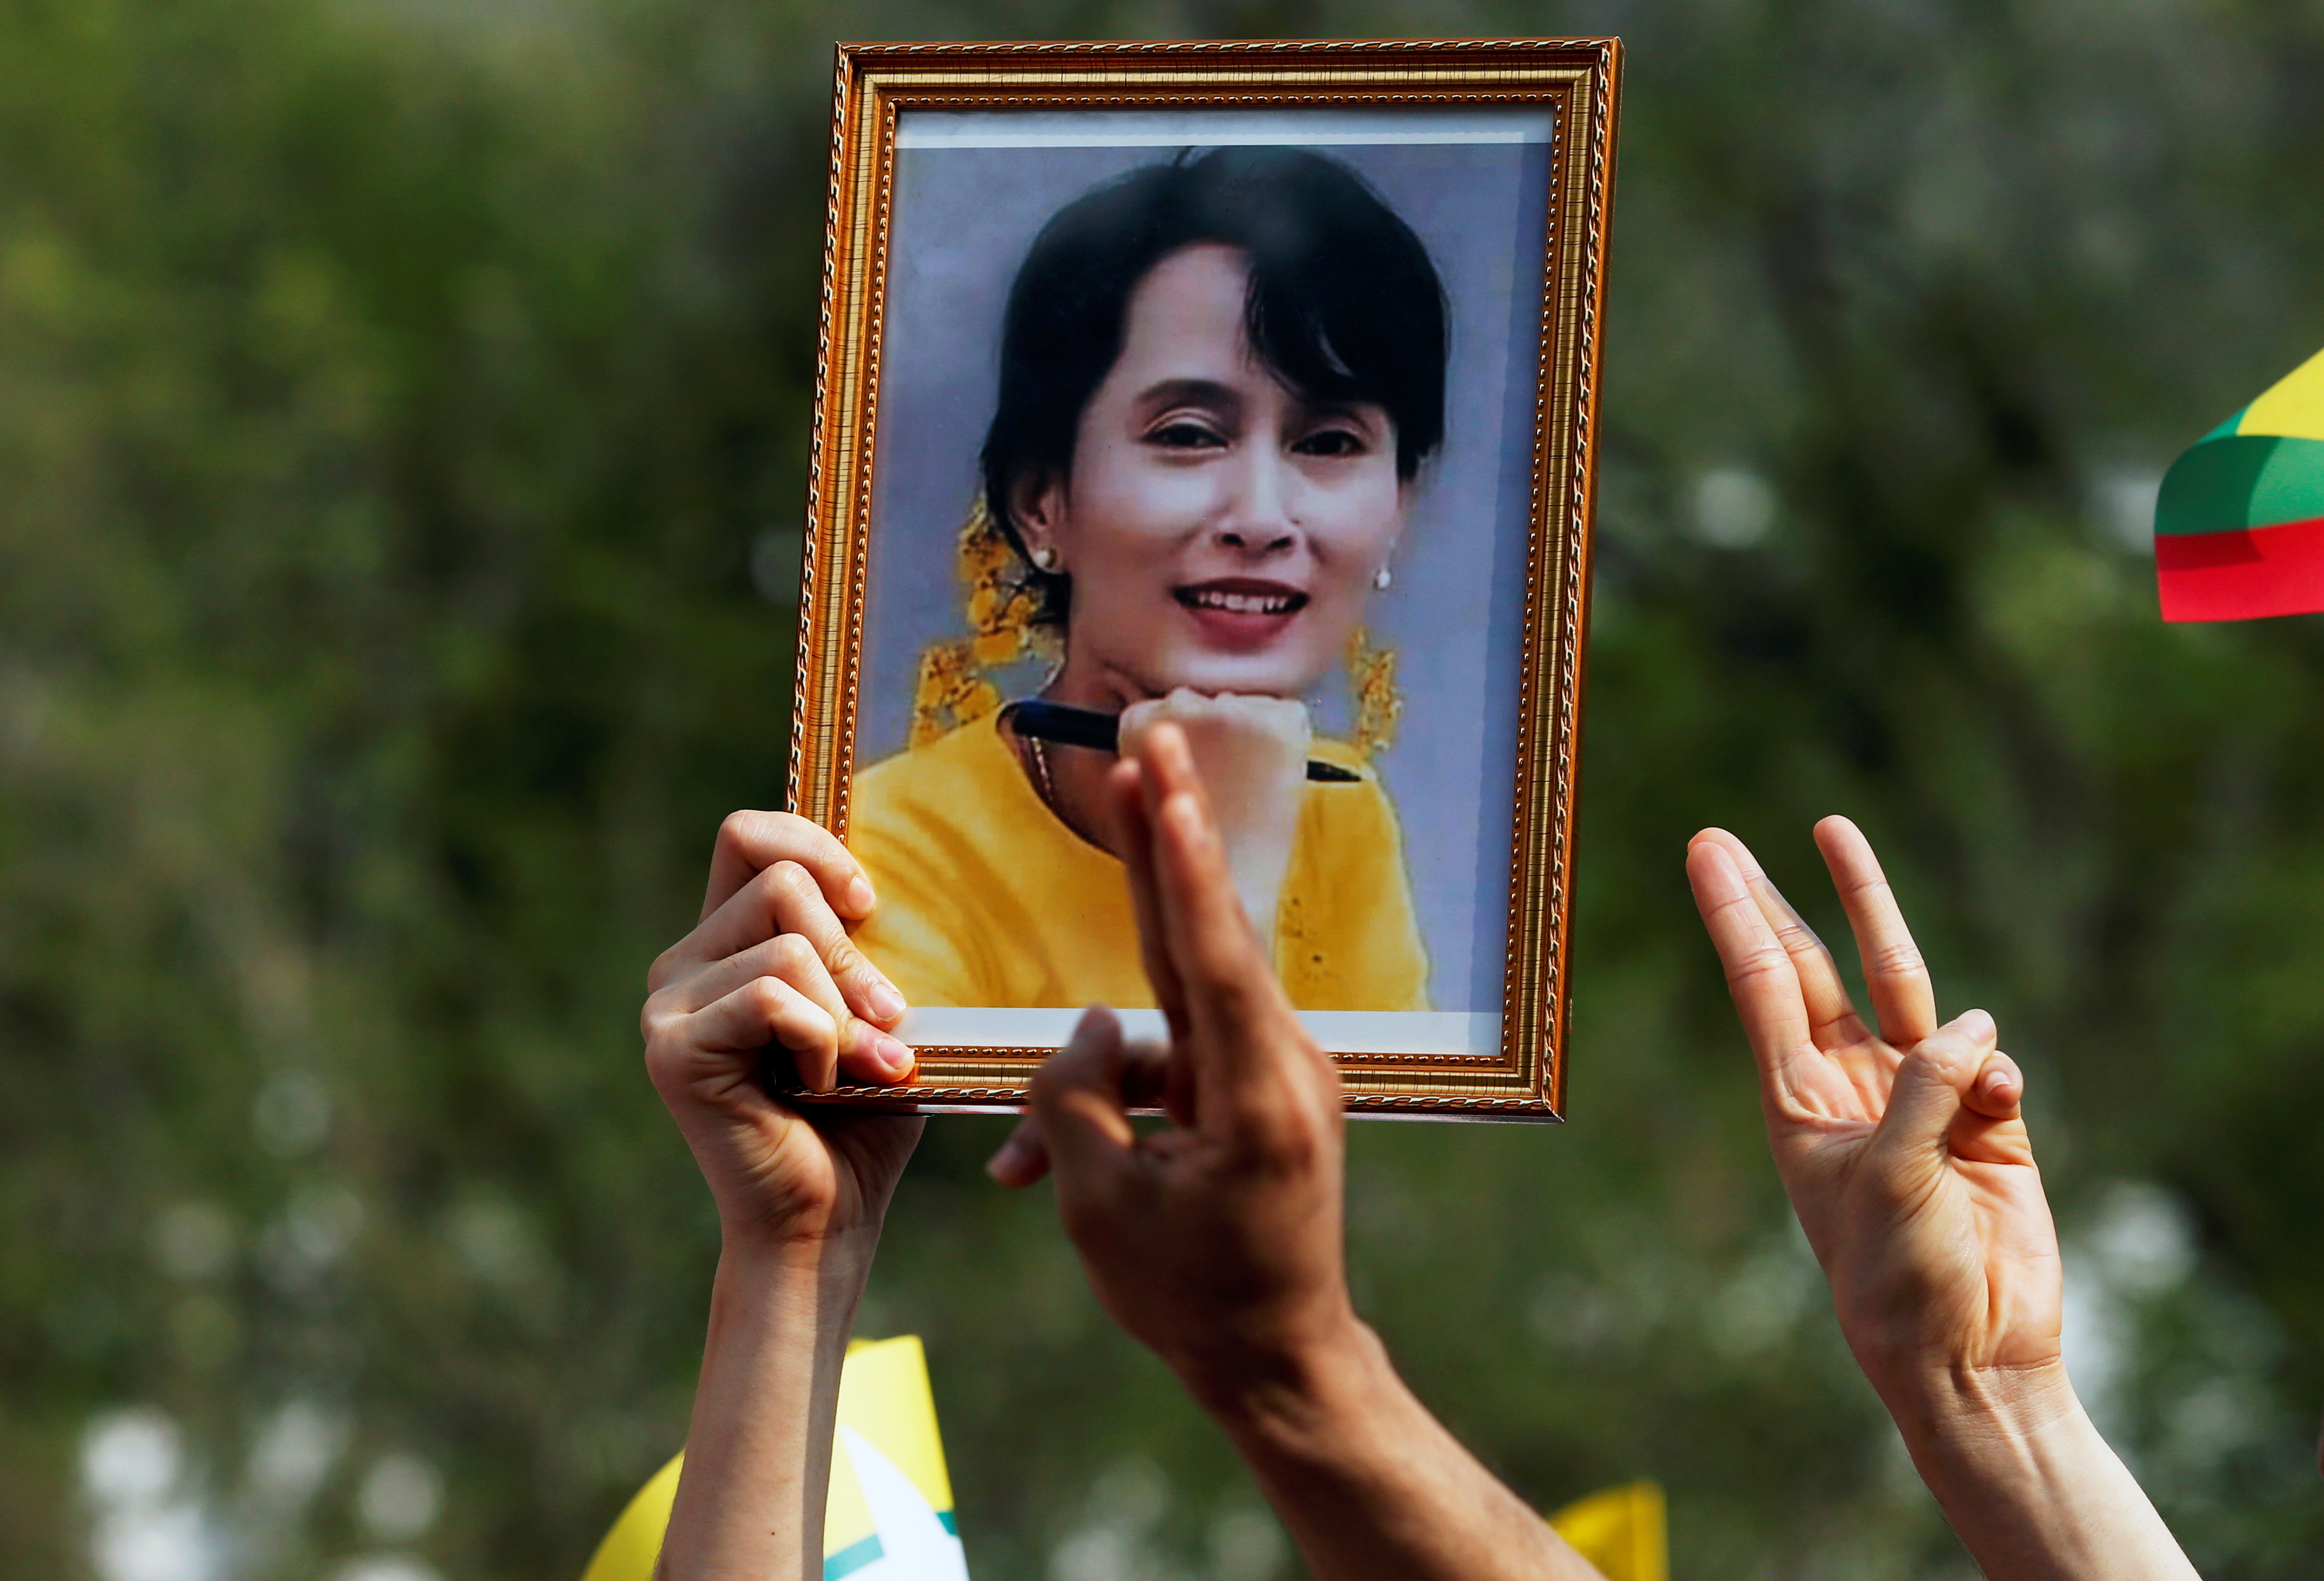 A person holds a picture of leader Aung San Suu Kyi as Myanmar citizens protest against the military coup in front of the U.N. office in Bangkok, Thailand February 22, 2021. REUTERS/Soe Zeya Tun/Files